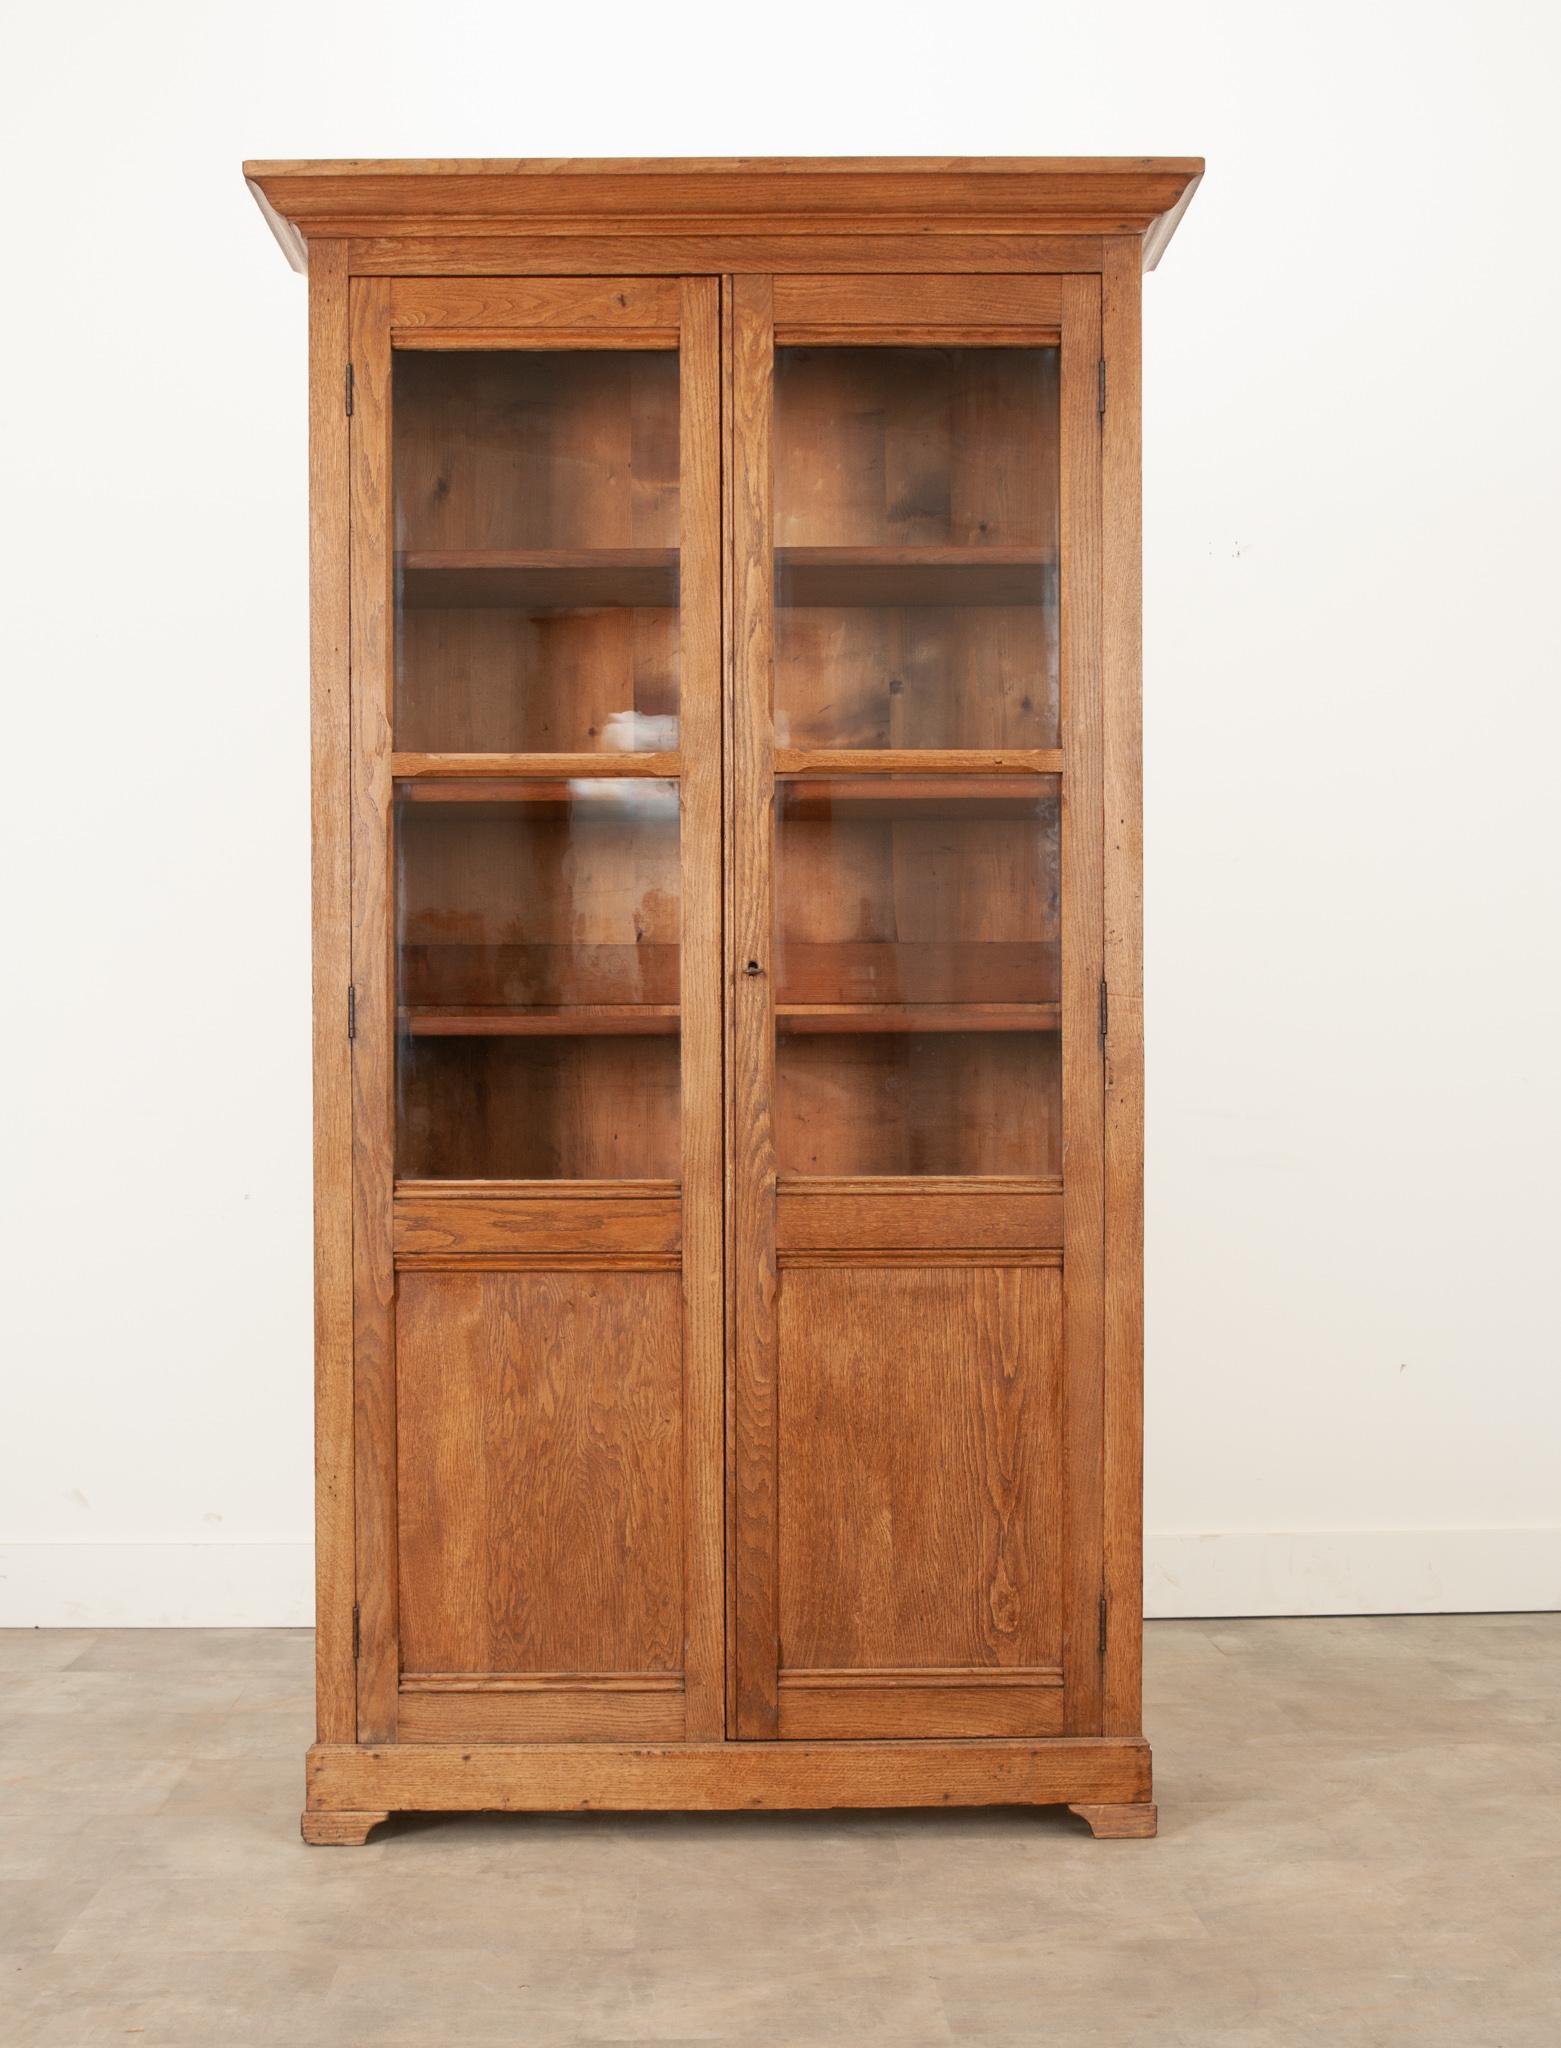 This solid oak bookcase pairs well with any style decor and has a raw oak finish. A sharp cornice tops the whole above a pair of glass front doors. The antique wavy glass provides a great view of the interior above simple paneling. Four adjustable